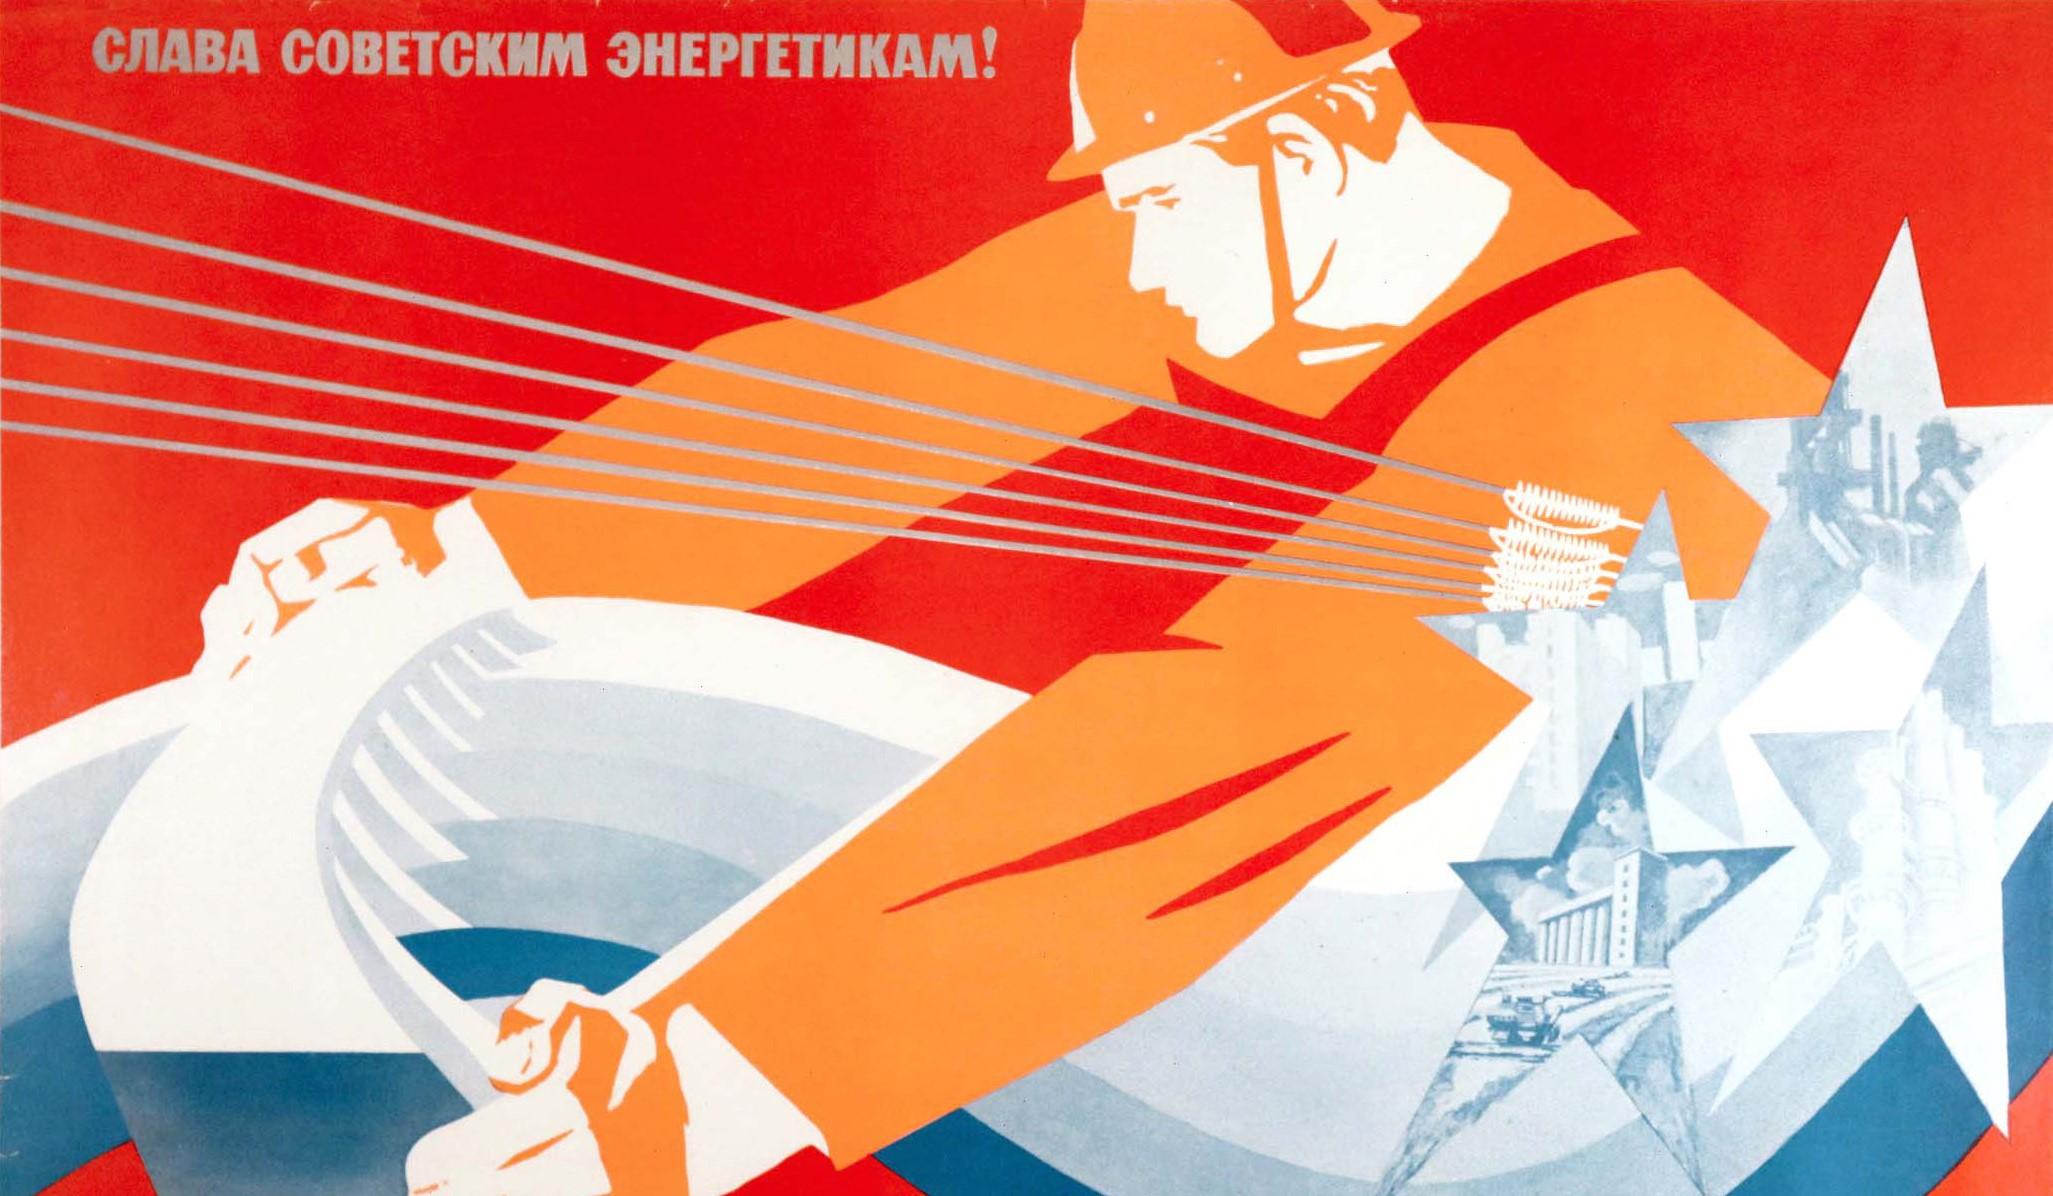 Original vintage USSR propaganda poster - Glory to the Soviet Power Engineers! Trillion kilowatt hours a year! - featuring a dynamic illustration of an engineer in uniform holding a hydropower river dam with electricity lines running diagonally